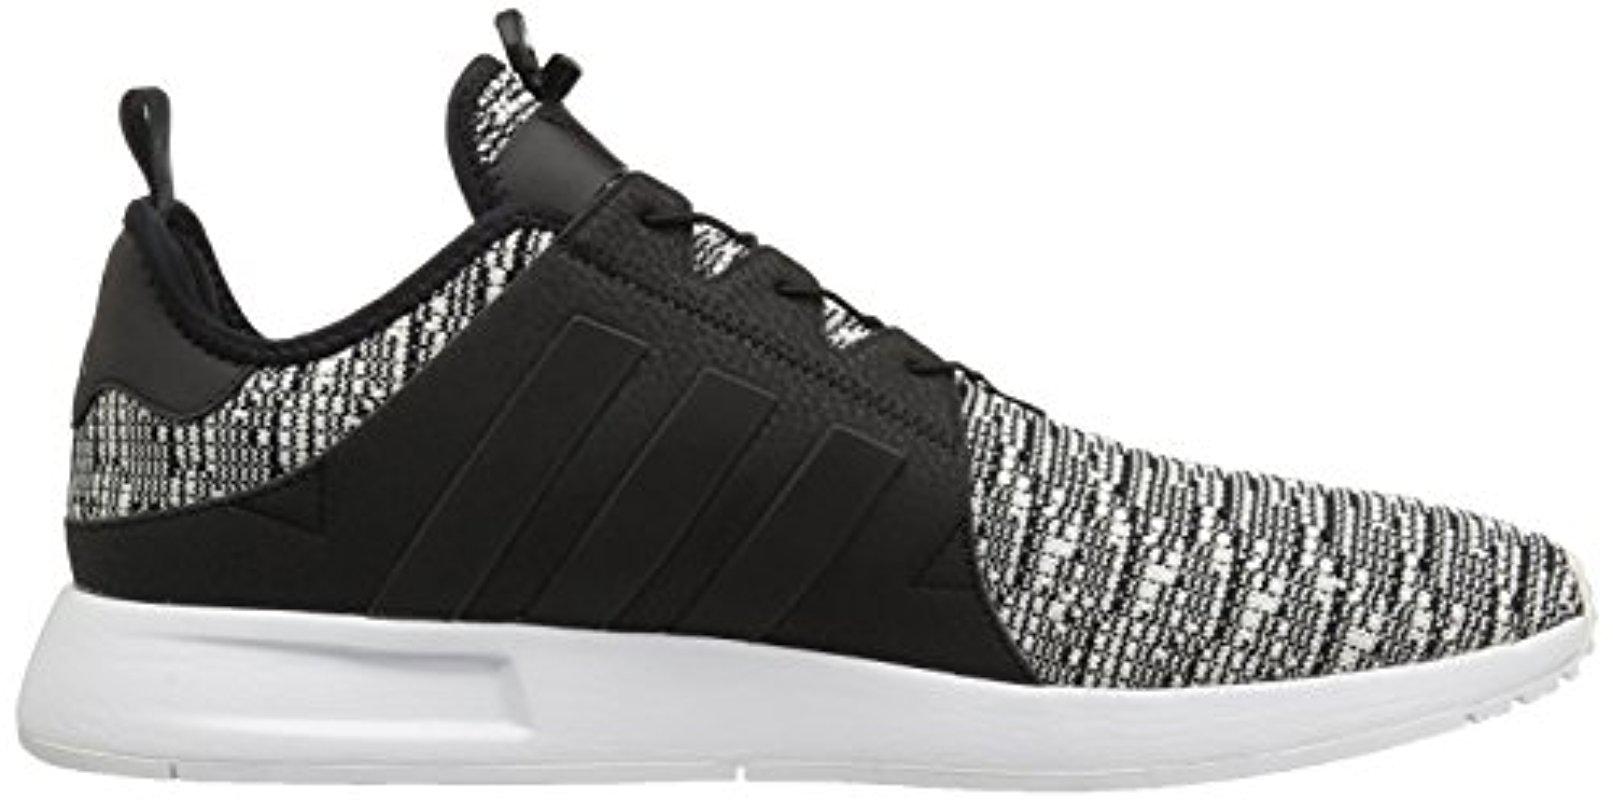 adidas Originals Rubber X_plr Sneakers, Lightweight, Comfortable And  Stylish With Speed Lacing System For Quick On-off Wear in Black/White  (Black) for Men | Lyst